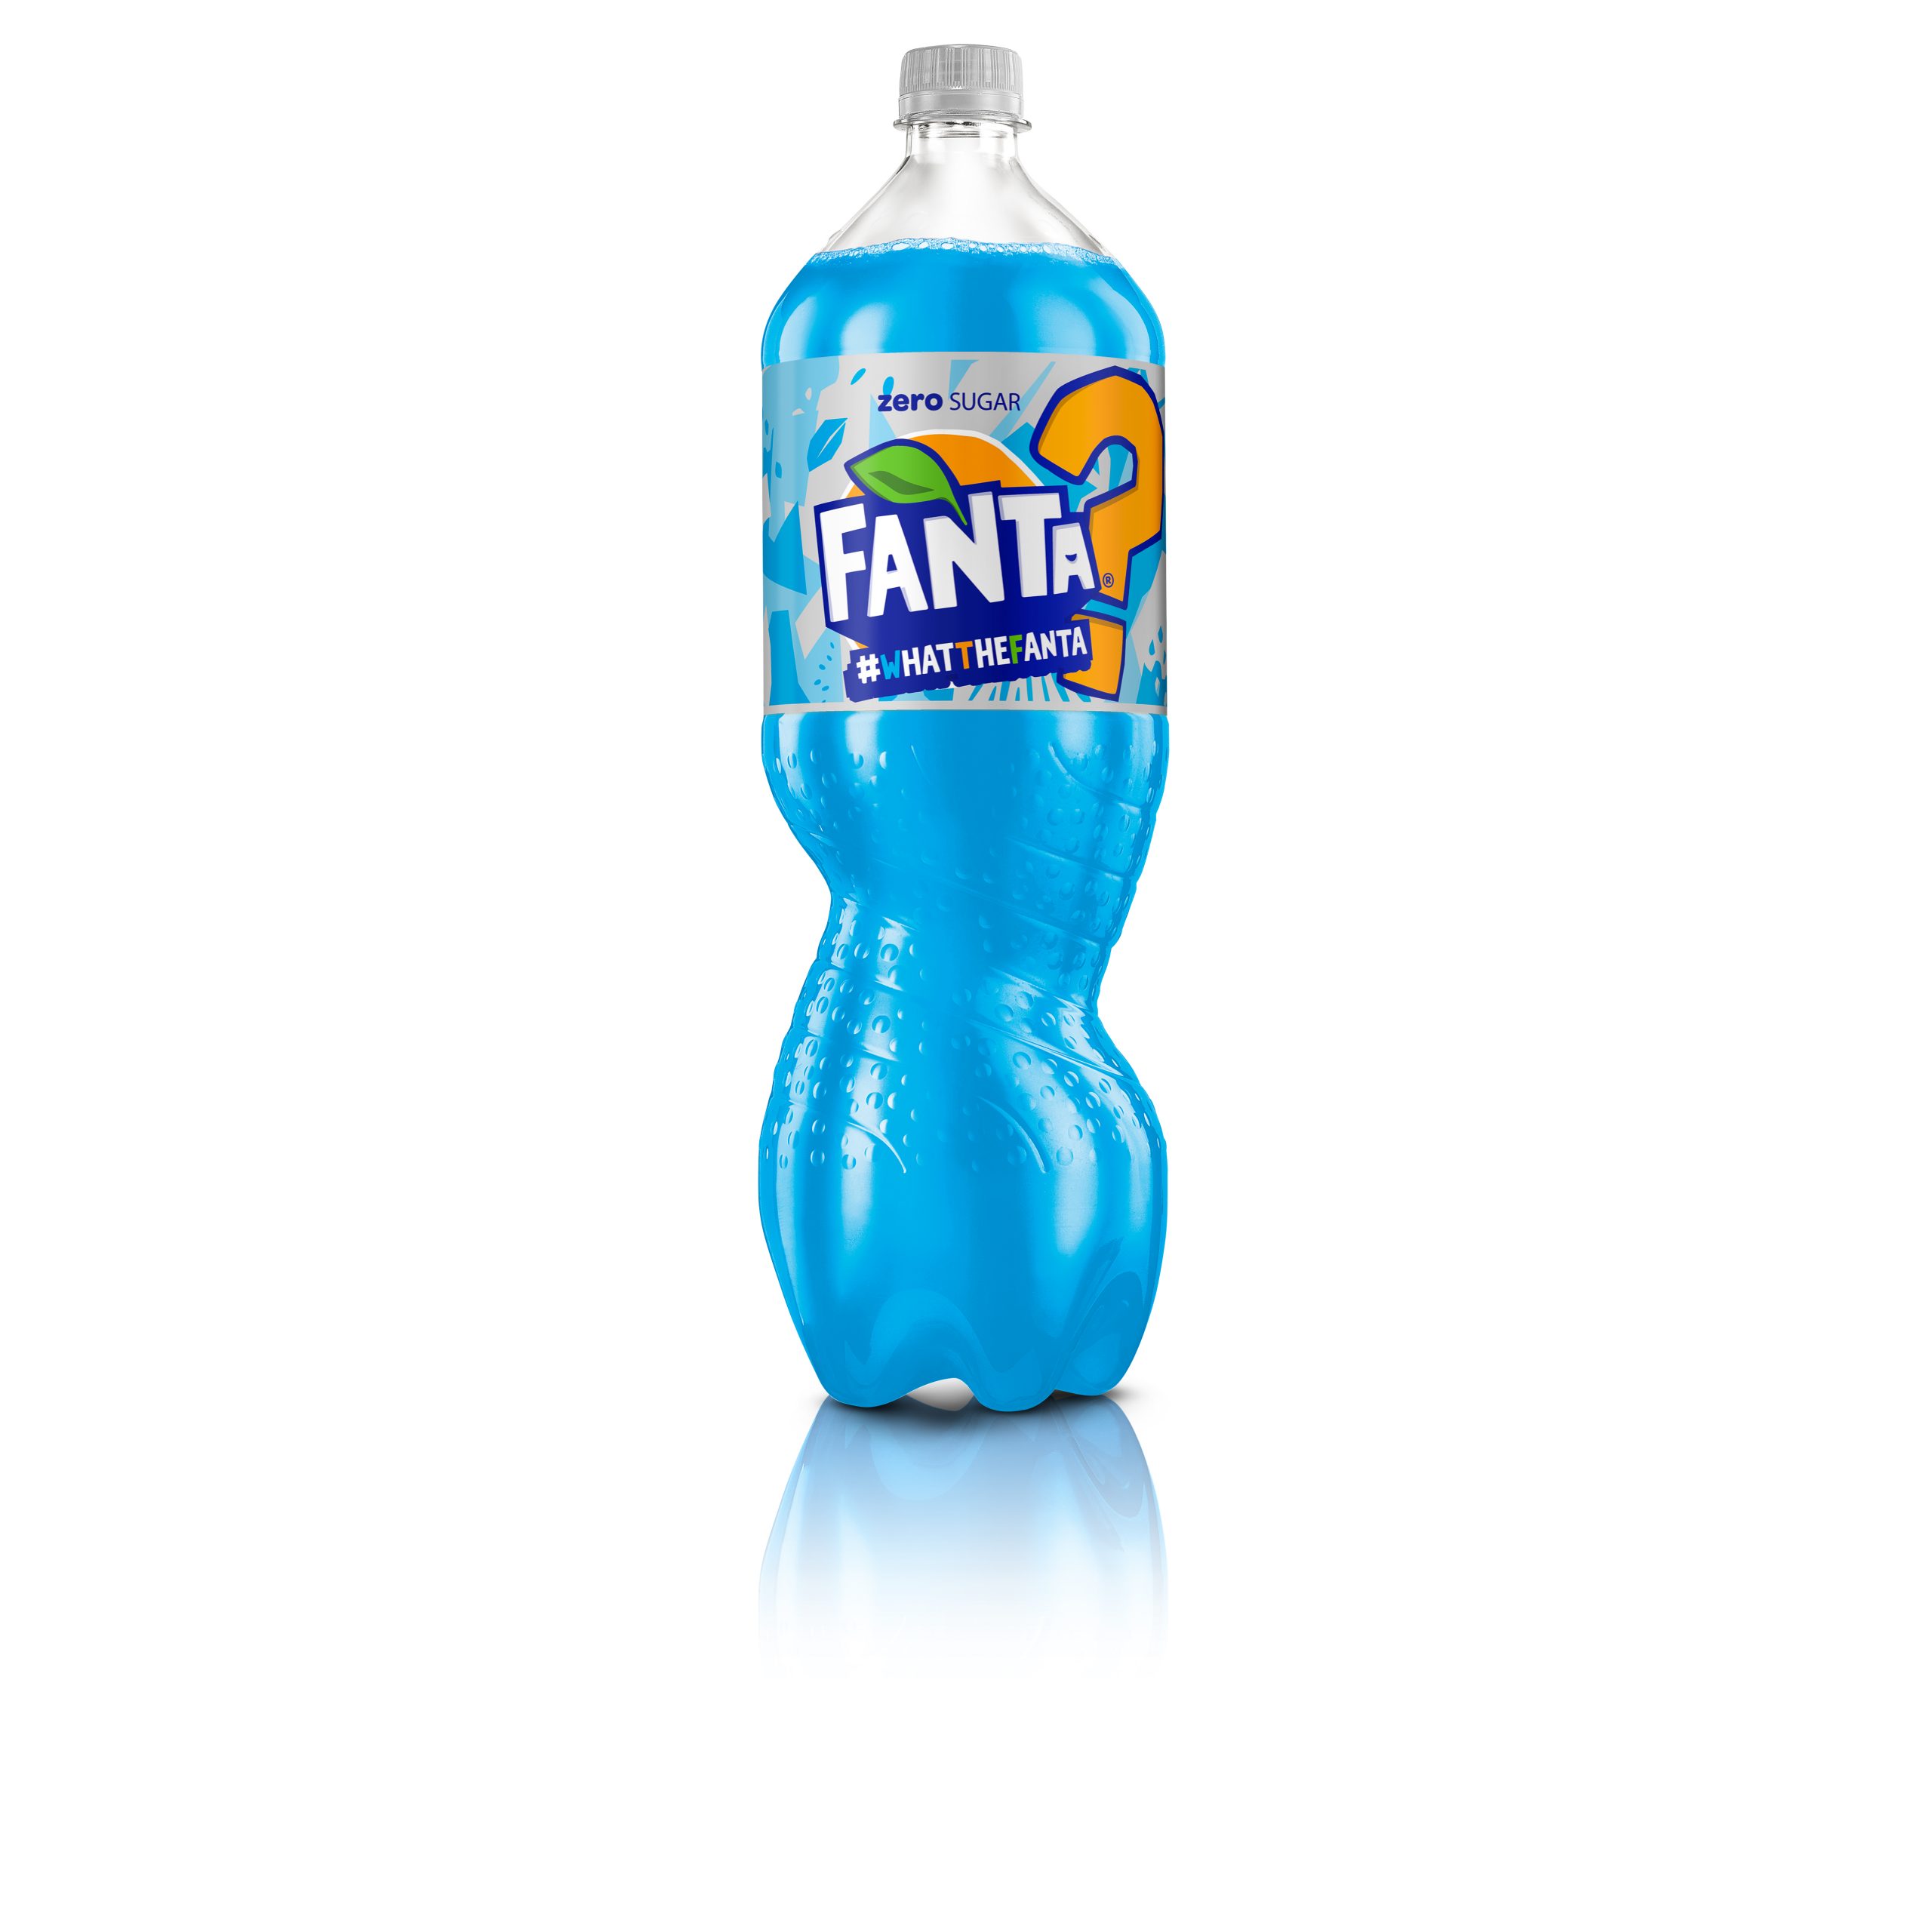 Fanta turns blue with mystery flavour launch